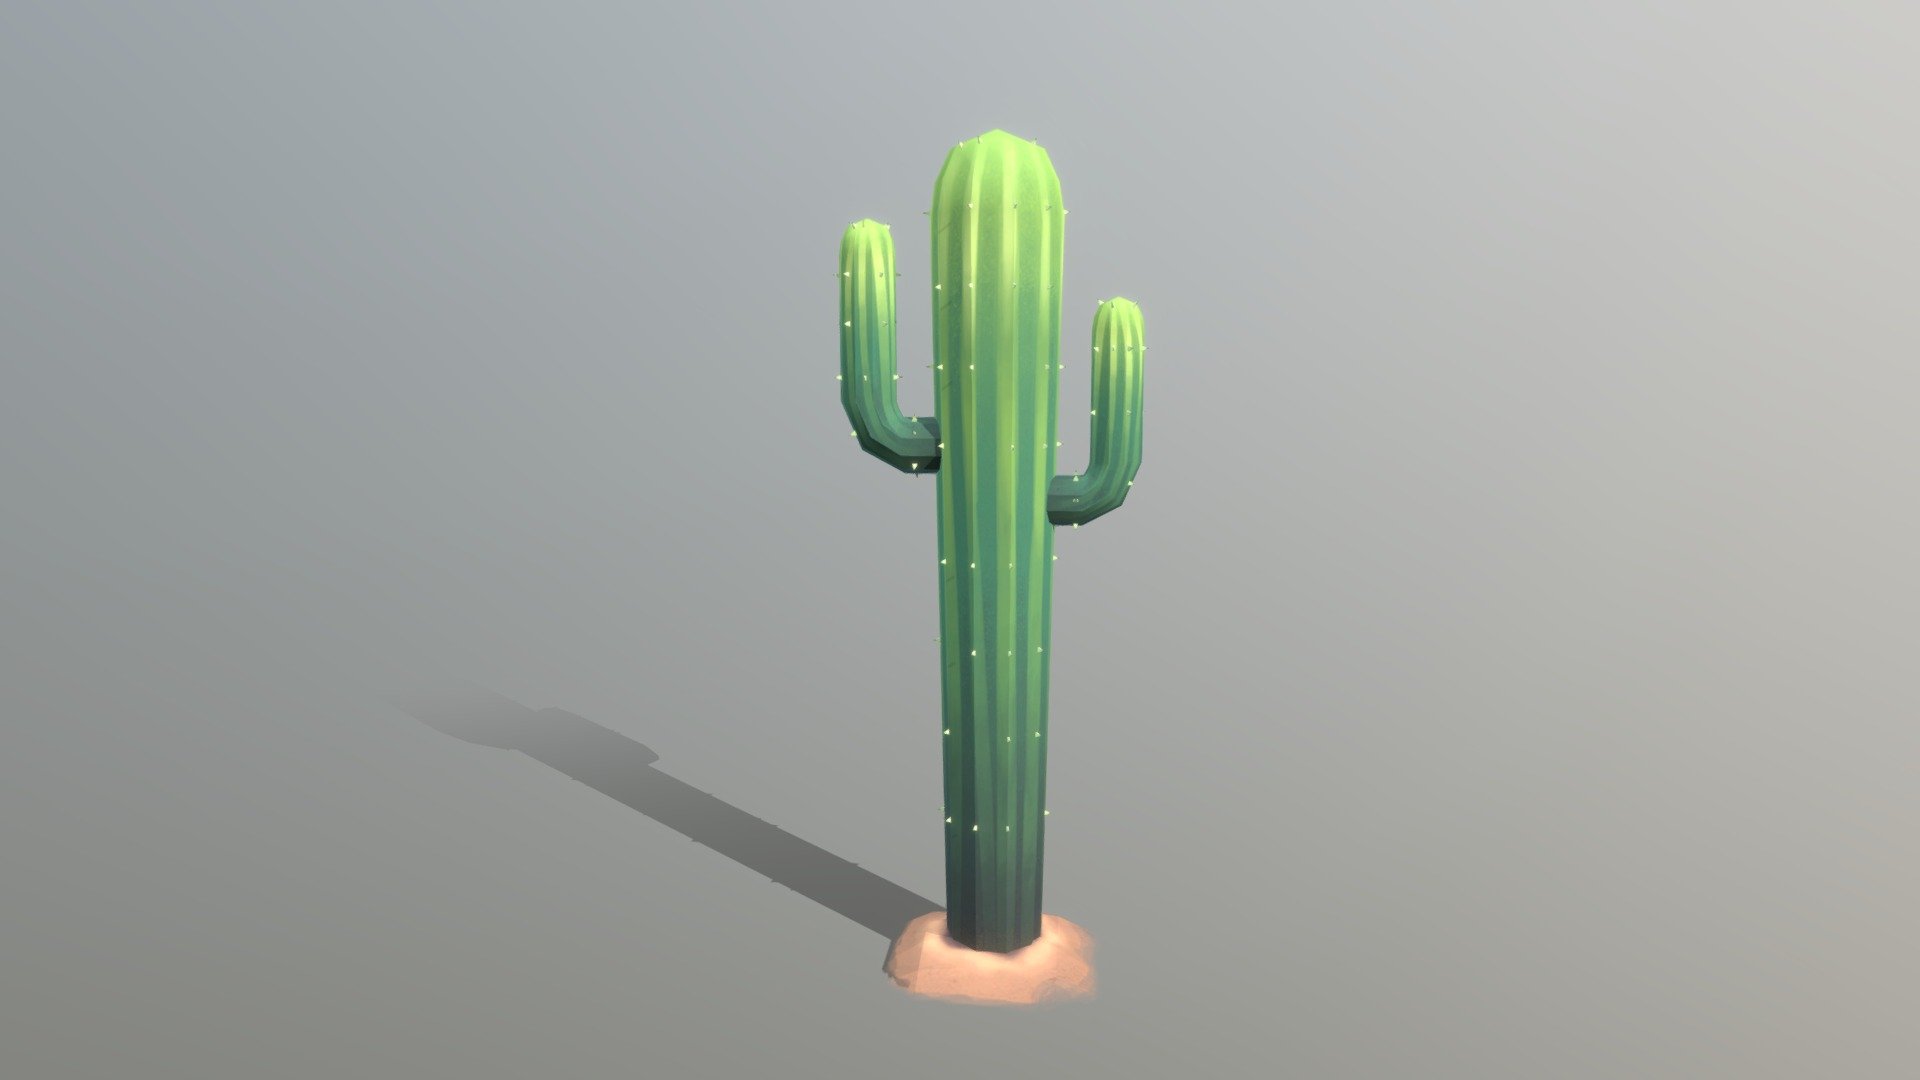 Here's a low poly cactus!

Painted in Photoshop - Low Poly Cactus - 3D model by annieroyalcreates 3d model